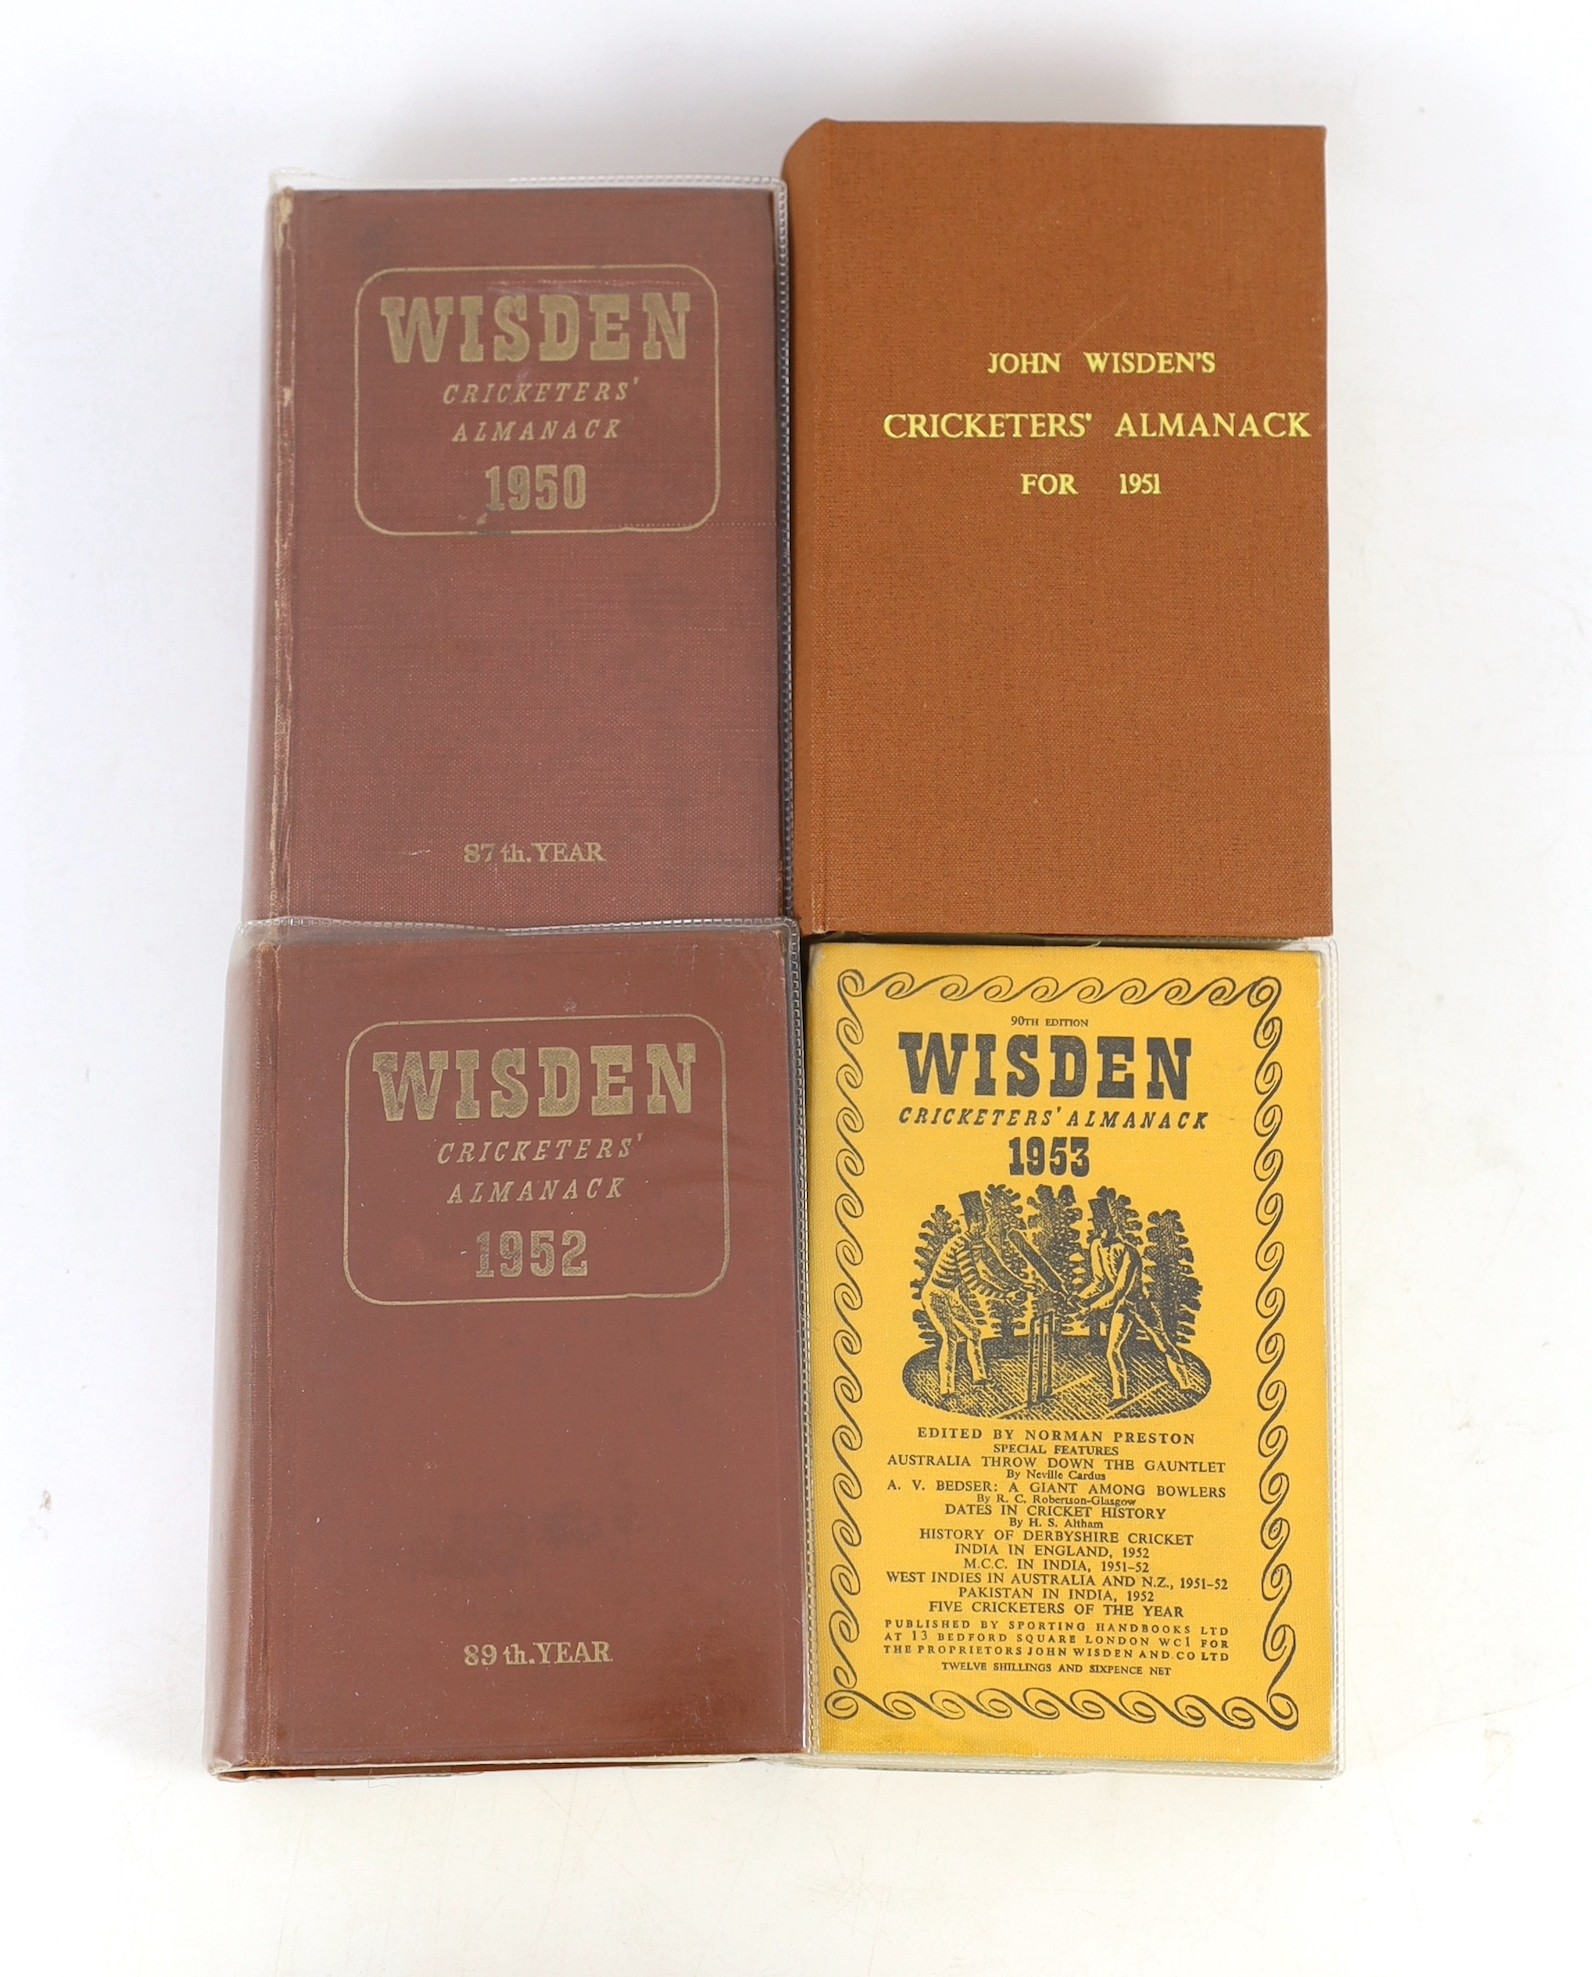 Wisden, John - Cricketers Almanack for the years 1946 (83rd edition) - 1959 (96th edition), original hardbacks for, 1946-49, 1950 and 1952, with original limp cloth wrappers for, 1949, 1953-54, 1956-59, rebound issues fo